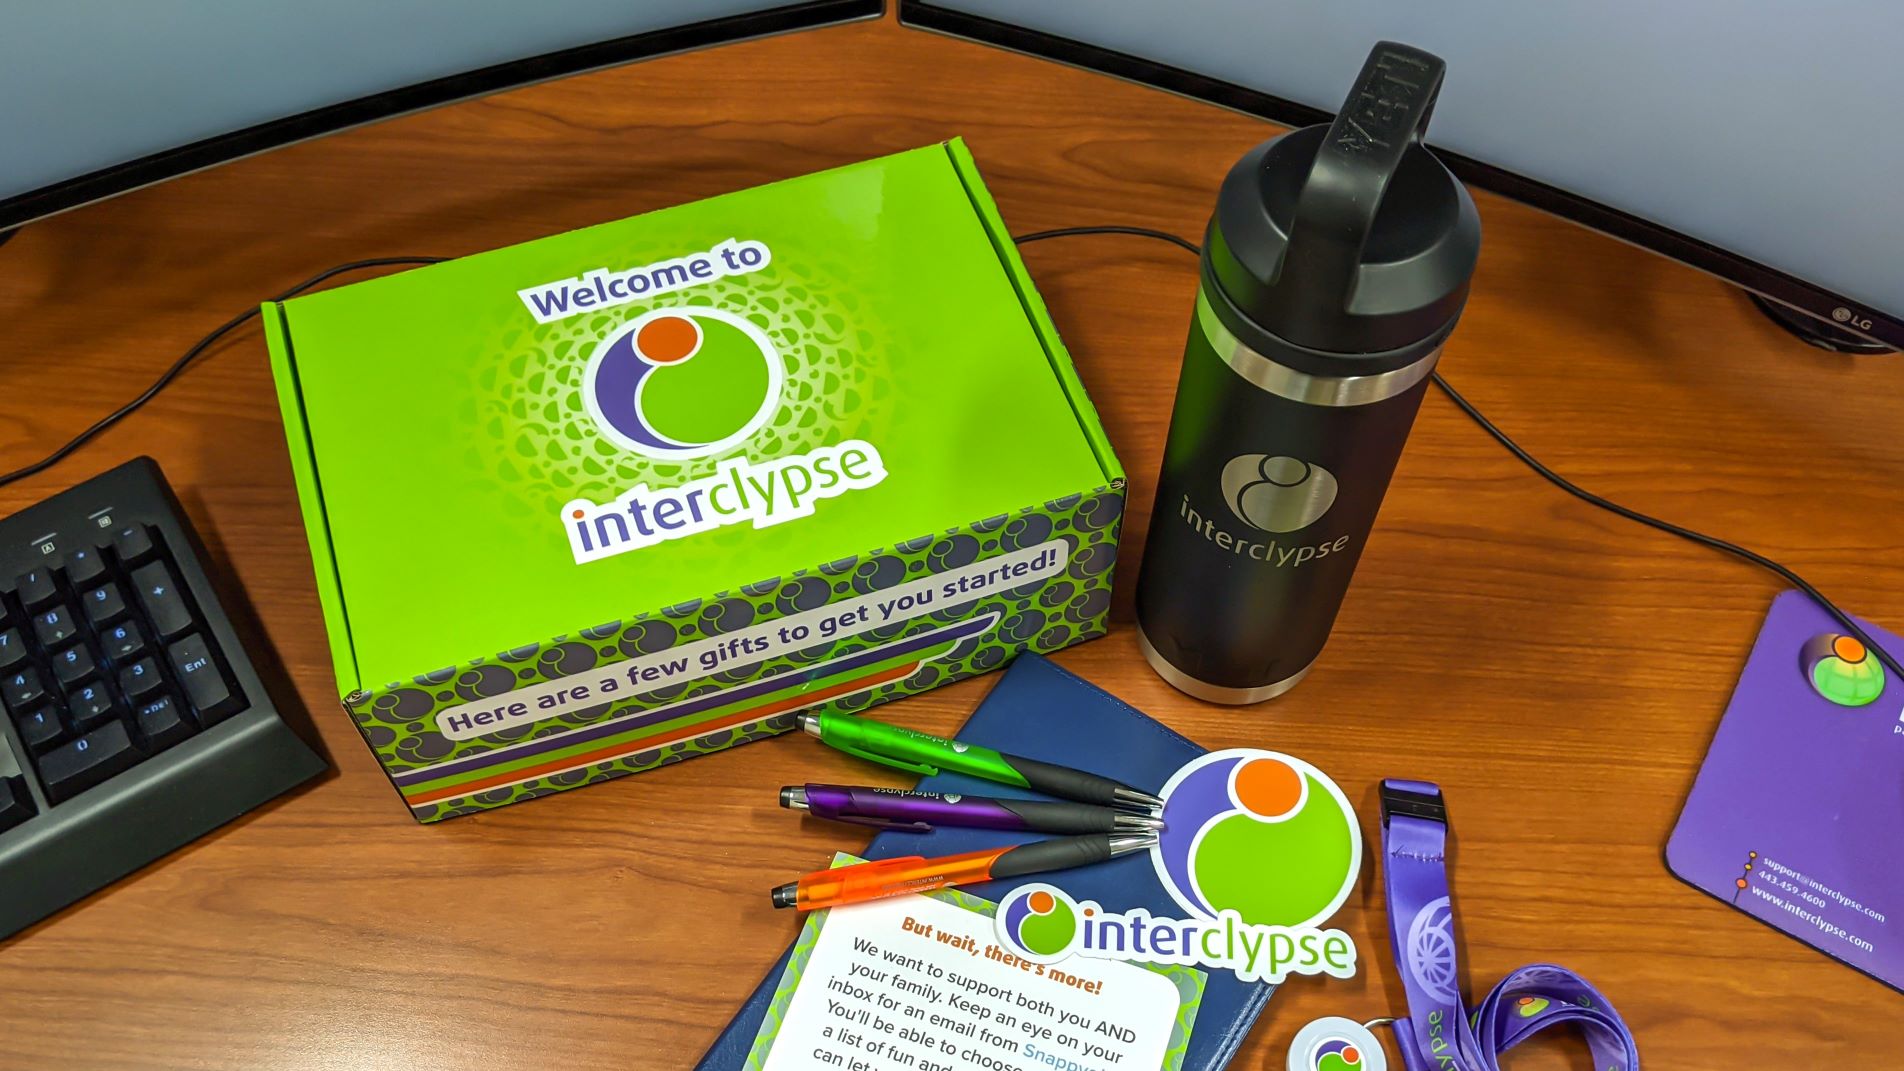 Interclypse Welcome kit featuring pens, stickers, engraved yeti thermos, lanyard, notebook, and a card directing new employees to check their emails for a Snappy gifts email.